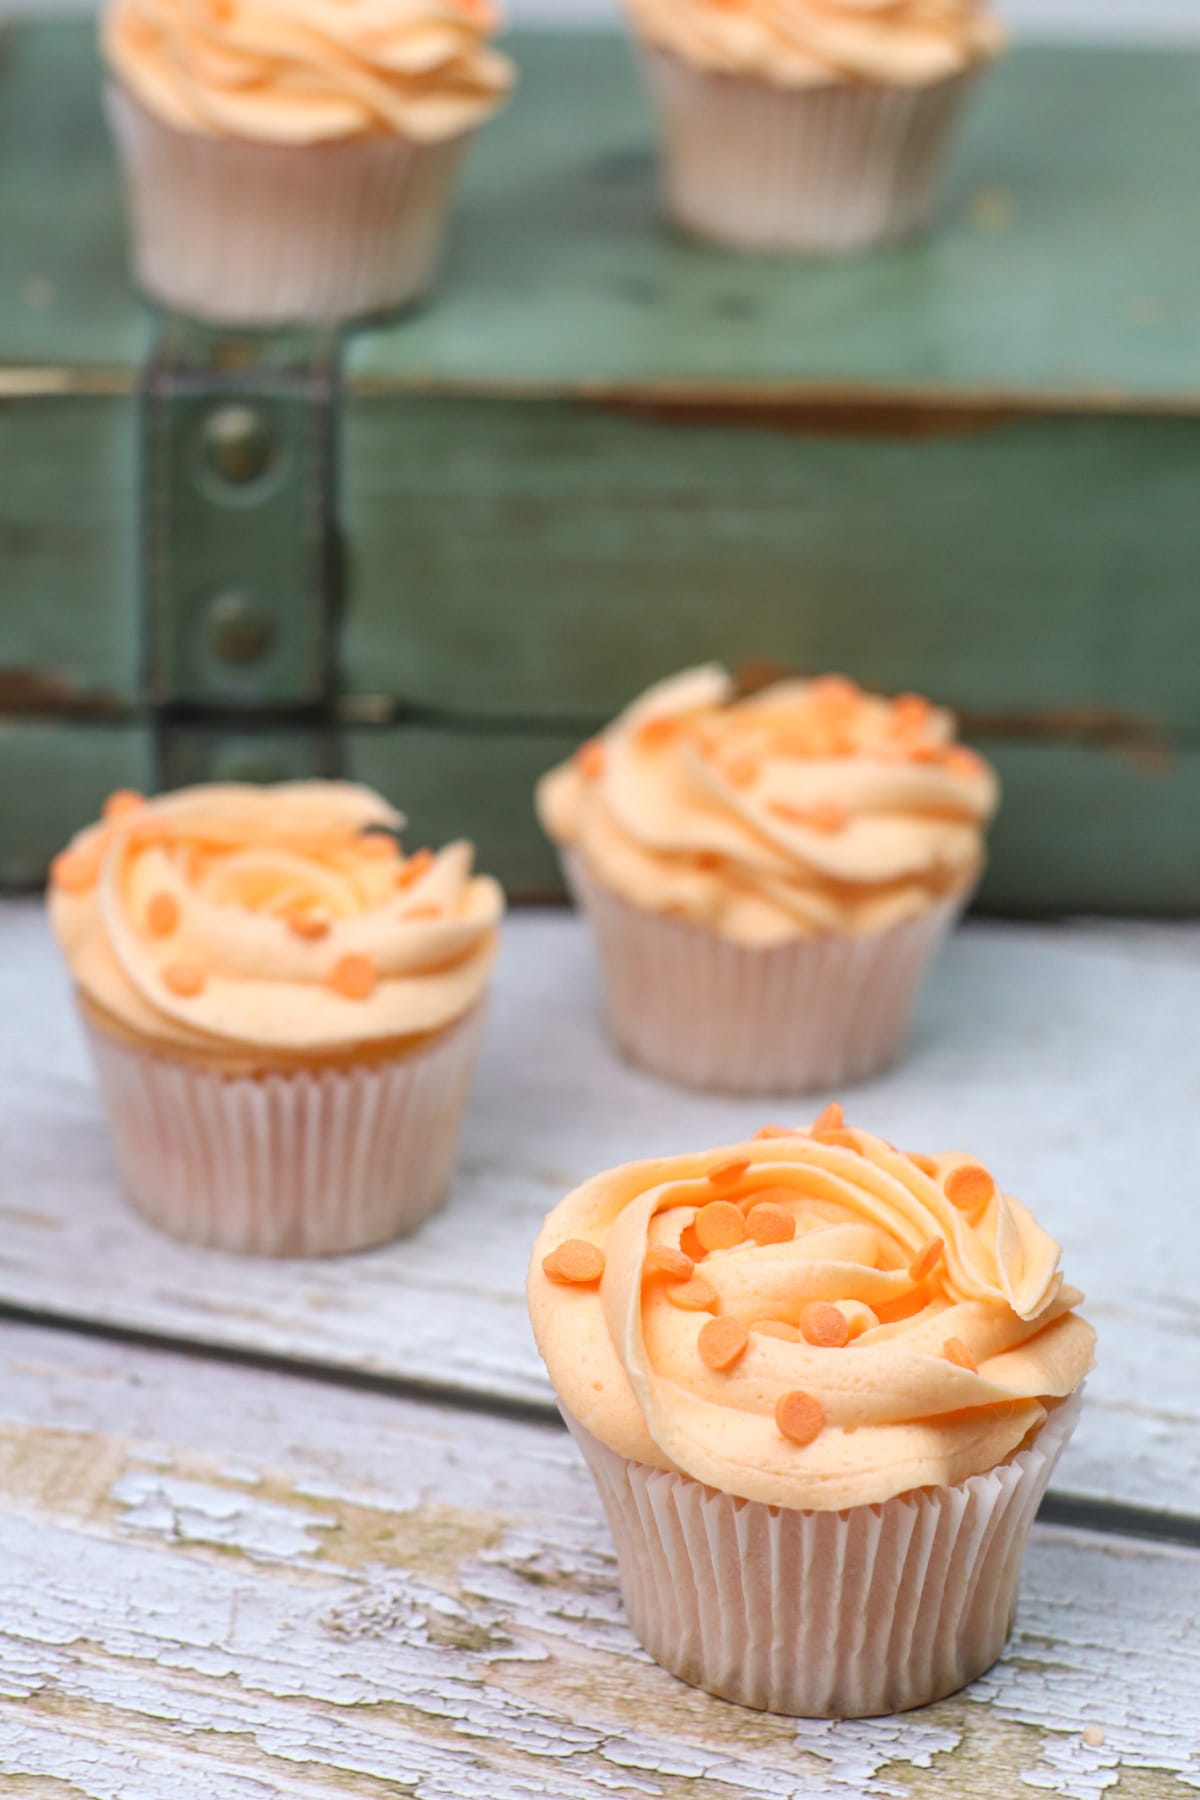 Peach cupcakes with green wooden book in background